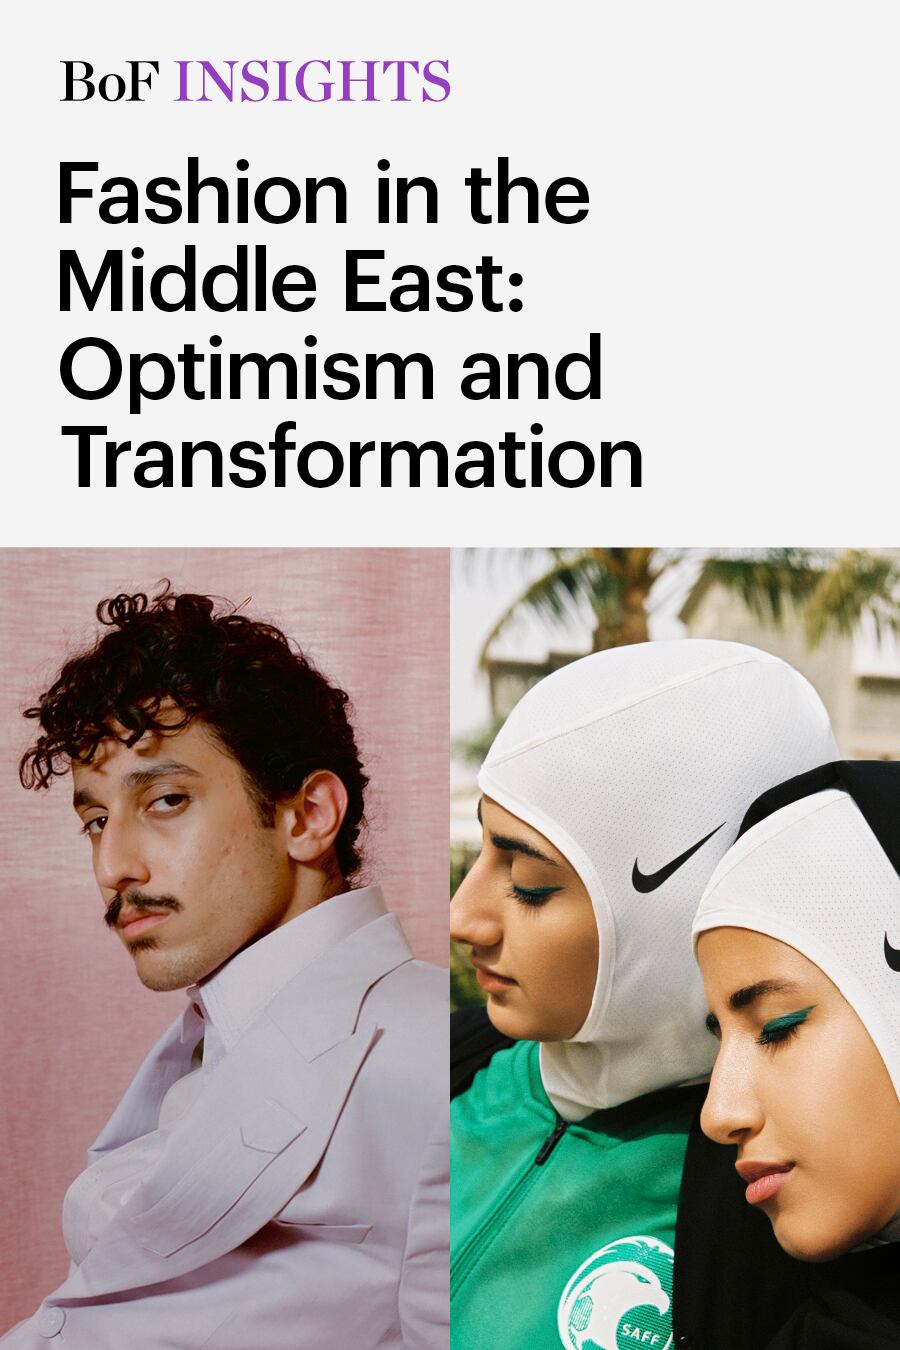 BoF Insights | Fashion in the Middle East: Optimism and Transformation